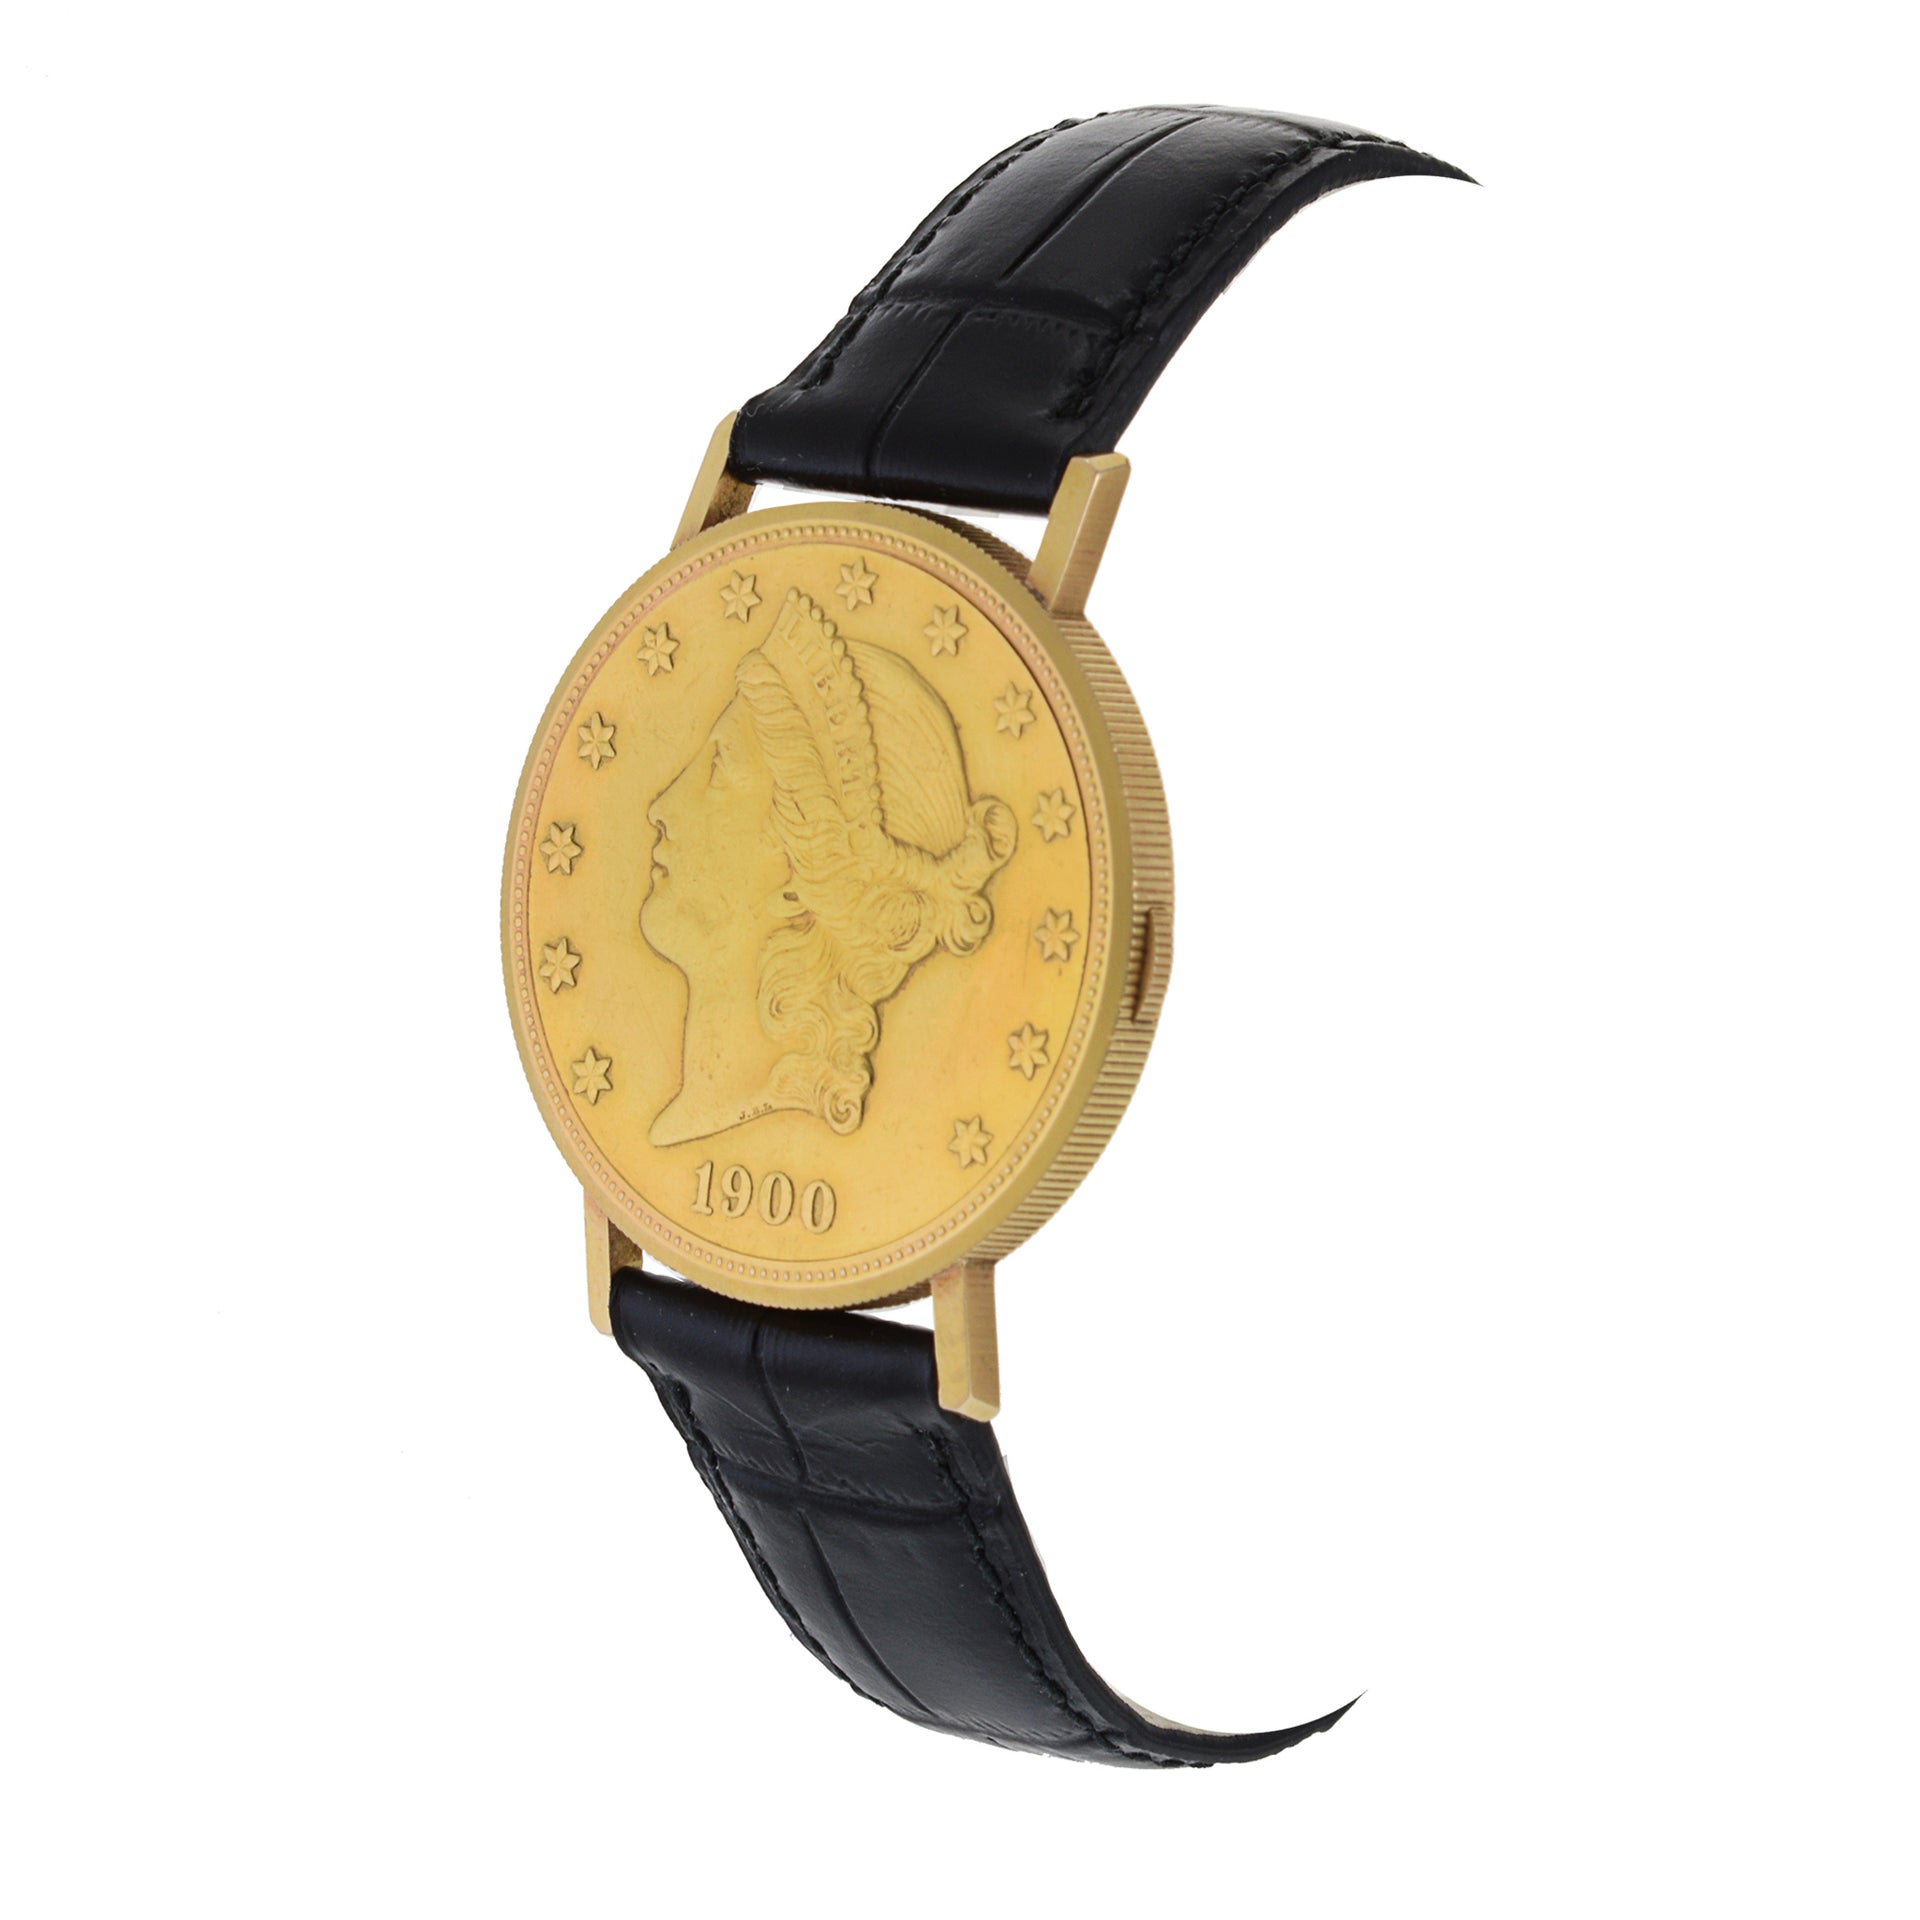 Paul Peugeot Twenty Dollar Manual Wind Coin Watch 18K Gold and 22K Gold